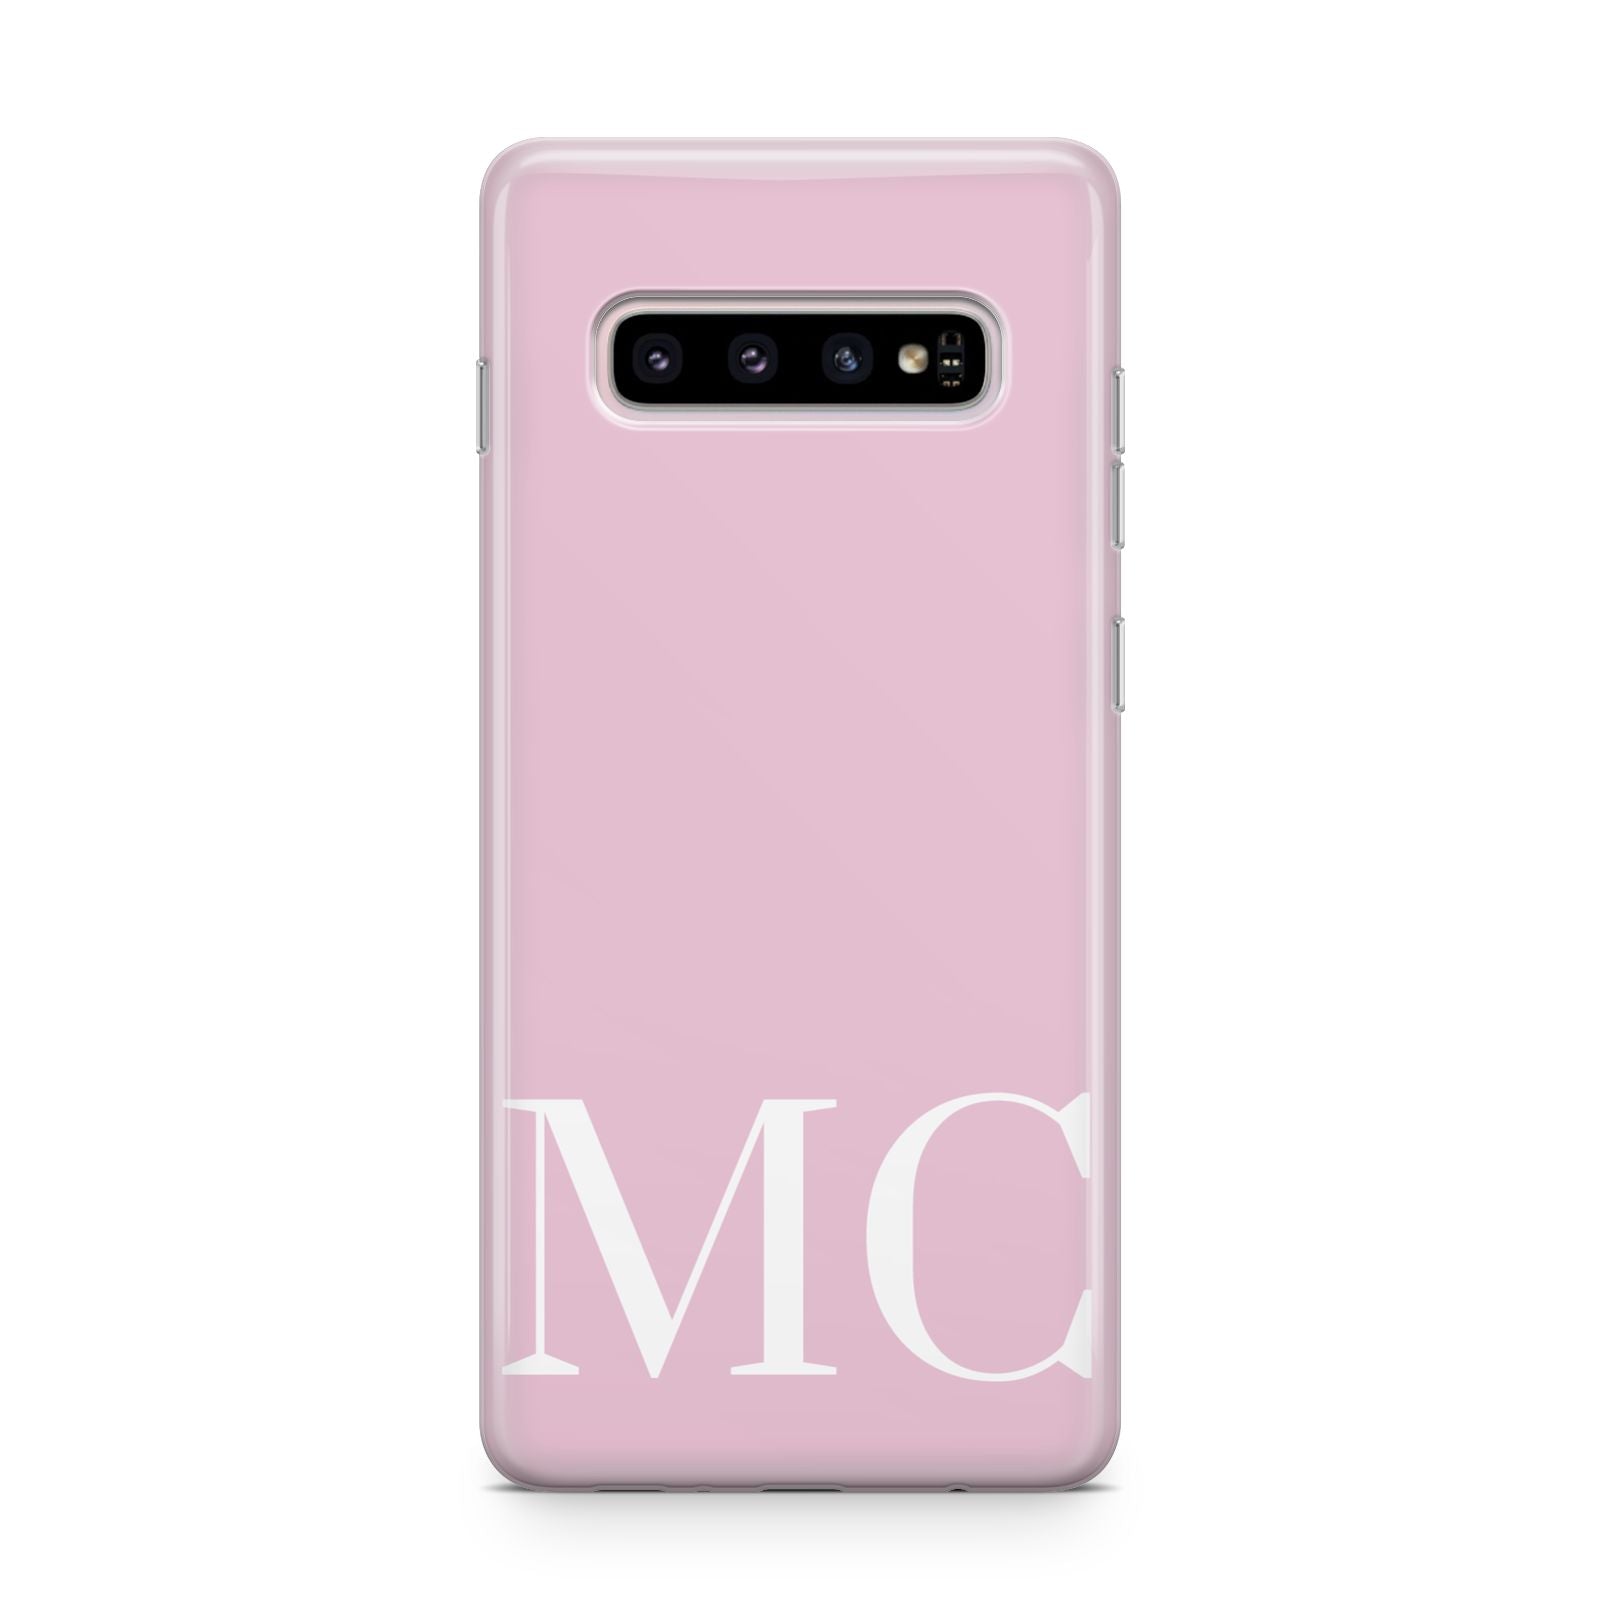 Initials Personalised 2 Samsung Galaxy S10 Plus Case